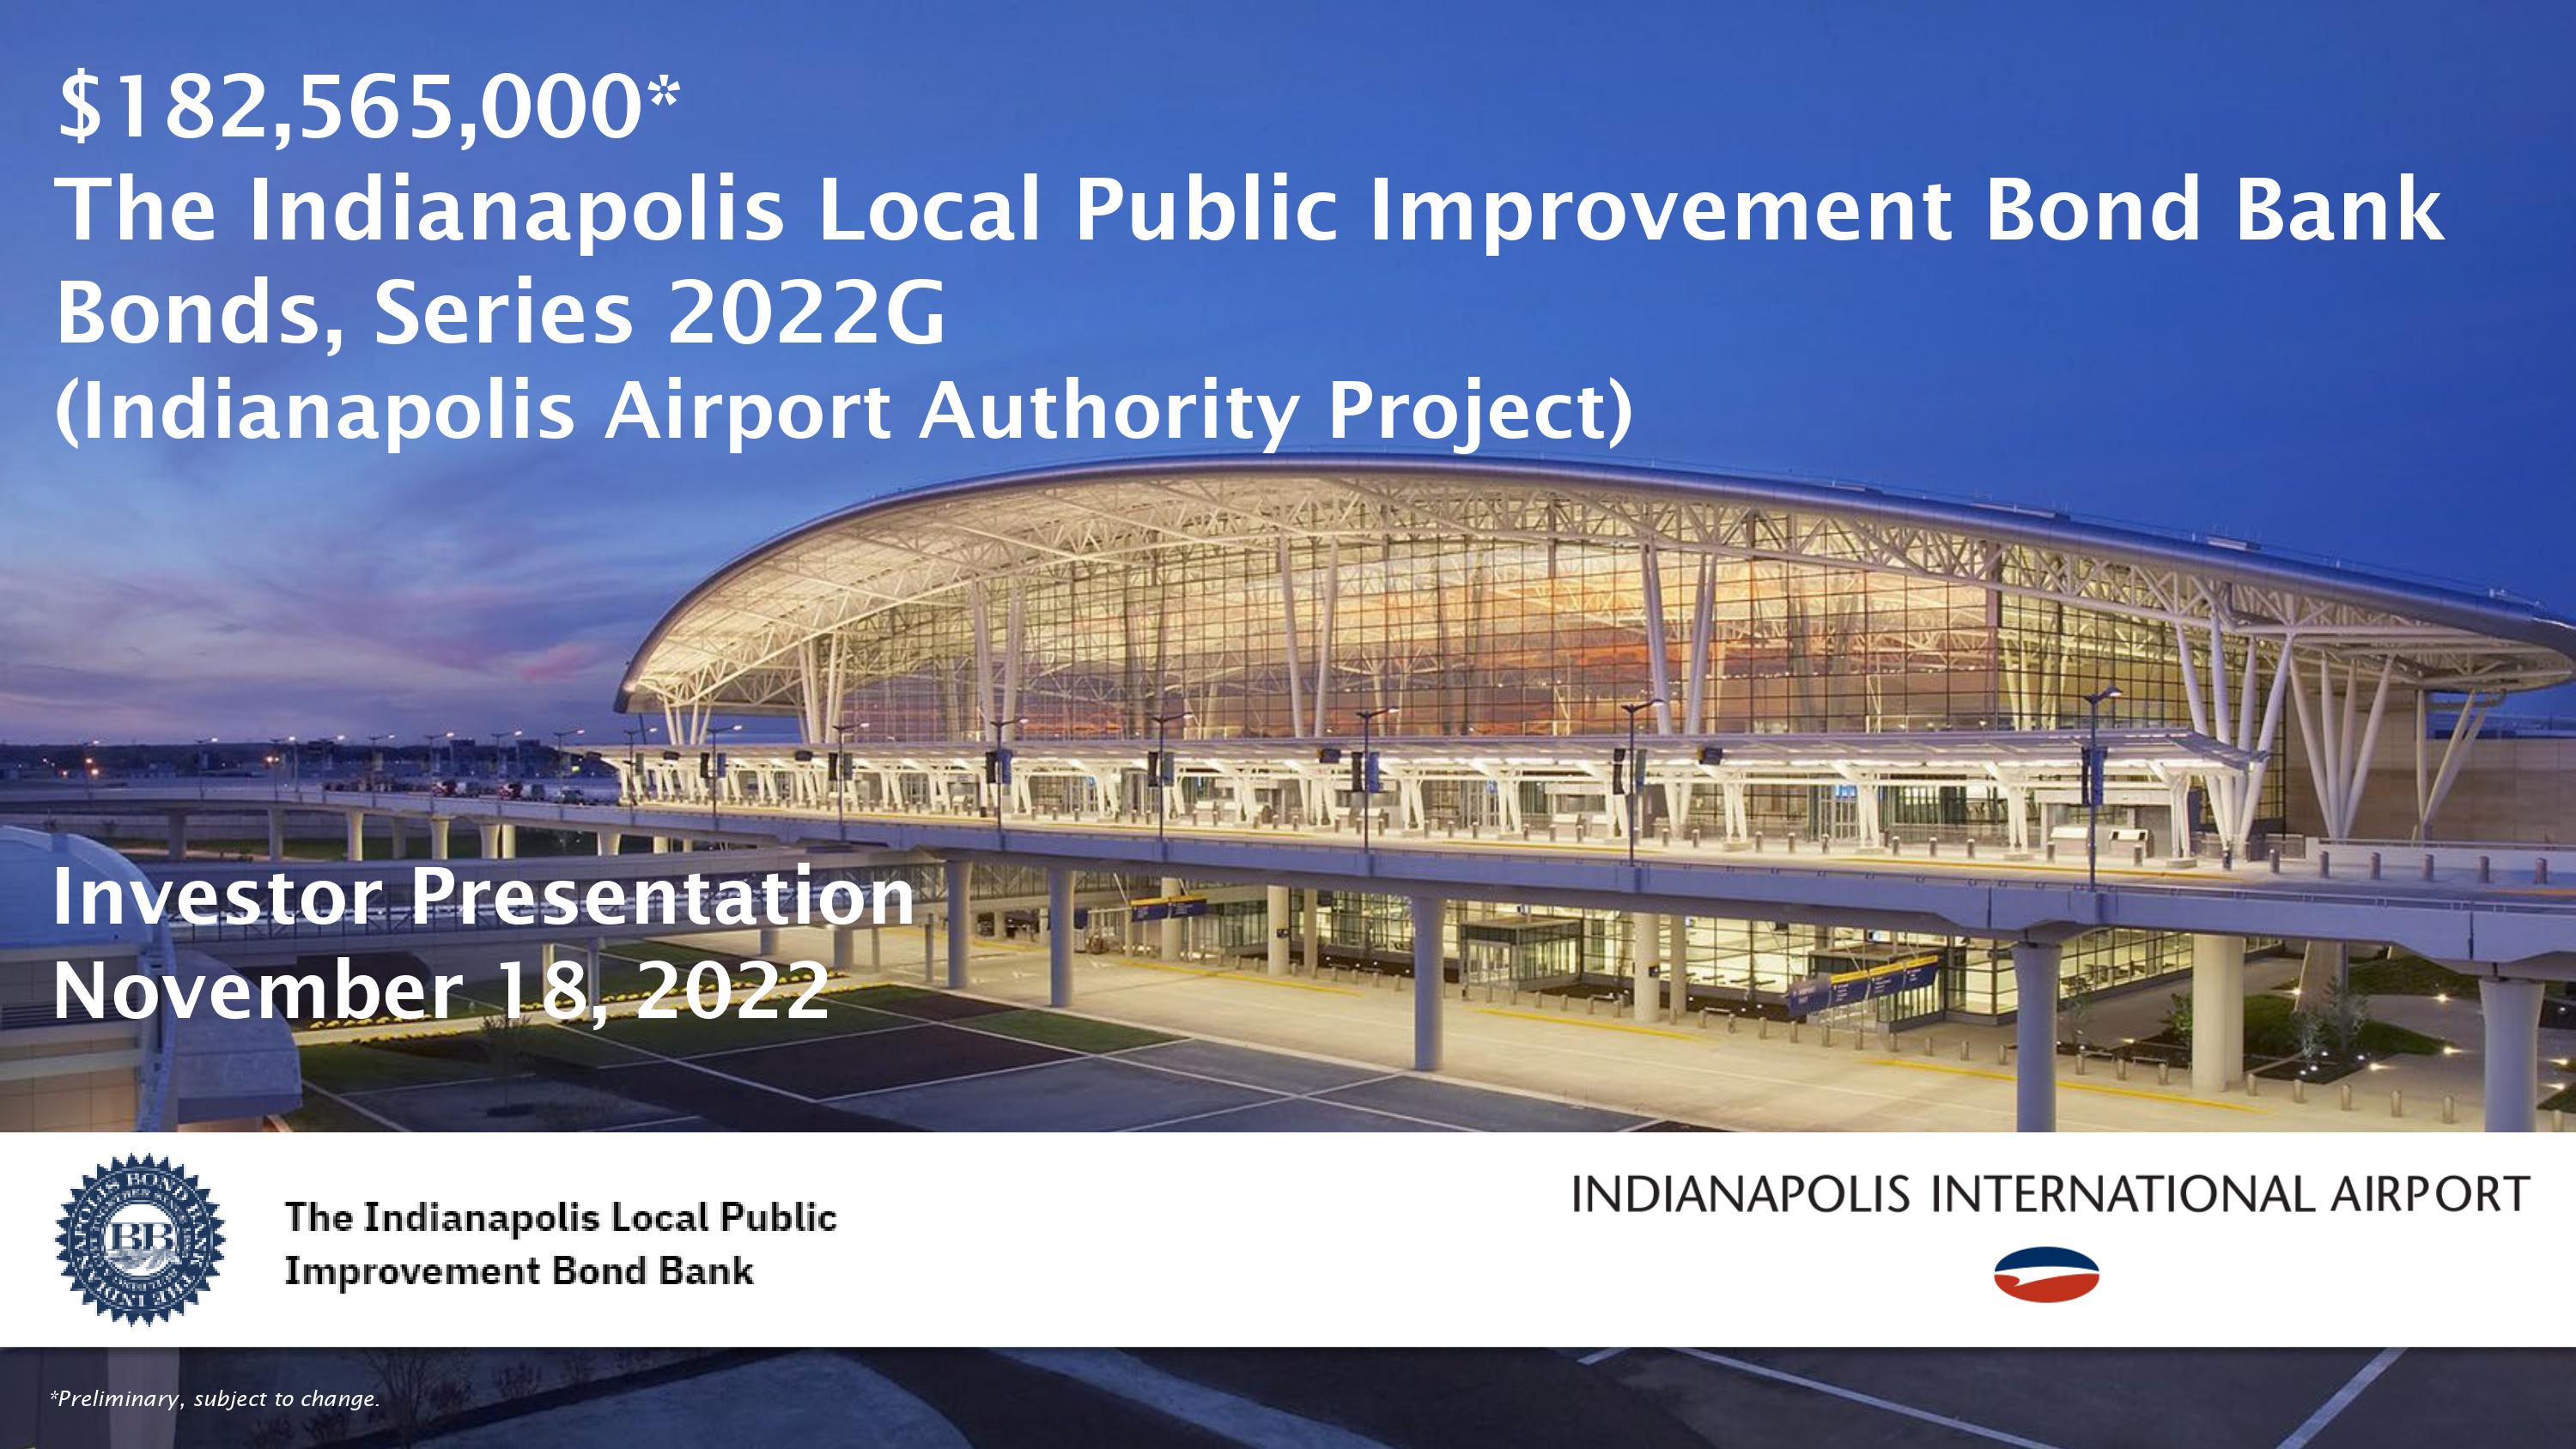 The Indianapolis Local Public Improvement Bond Bank Bonds, Series 2022G (Indianapolis Airport Authority Project)